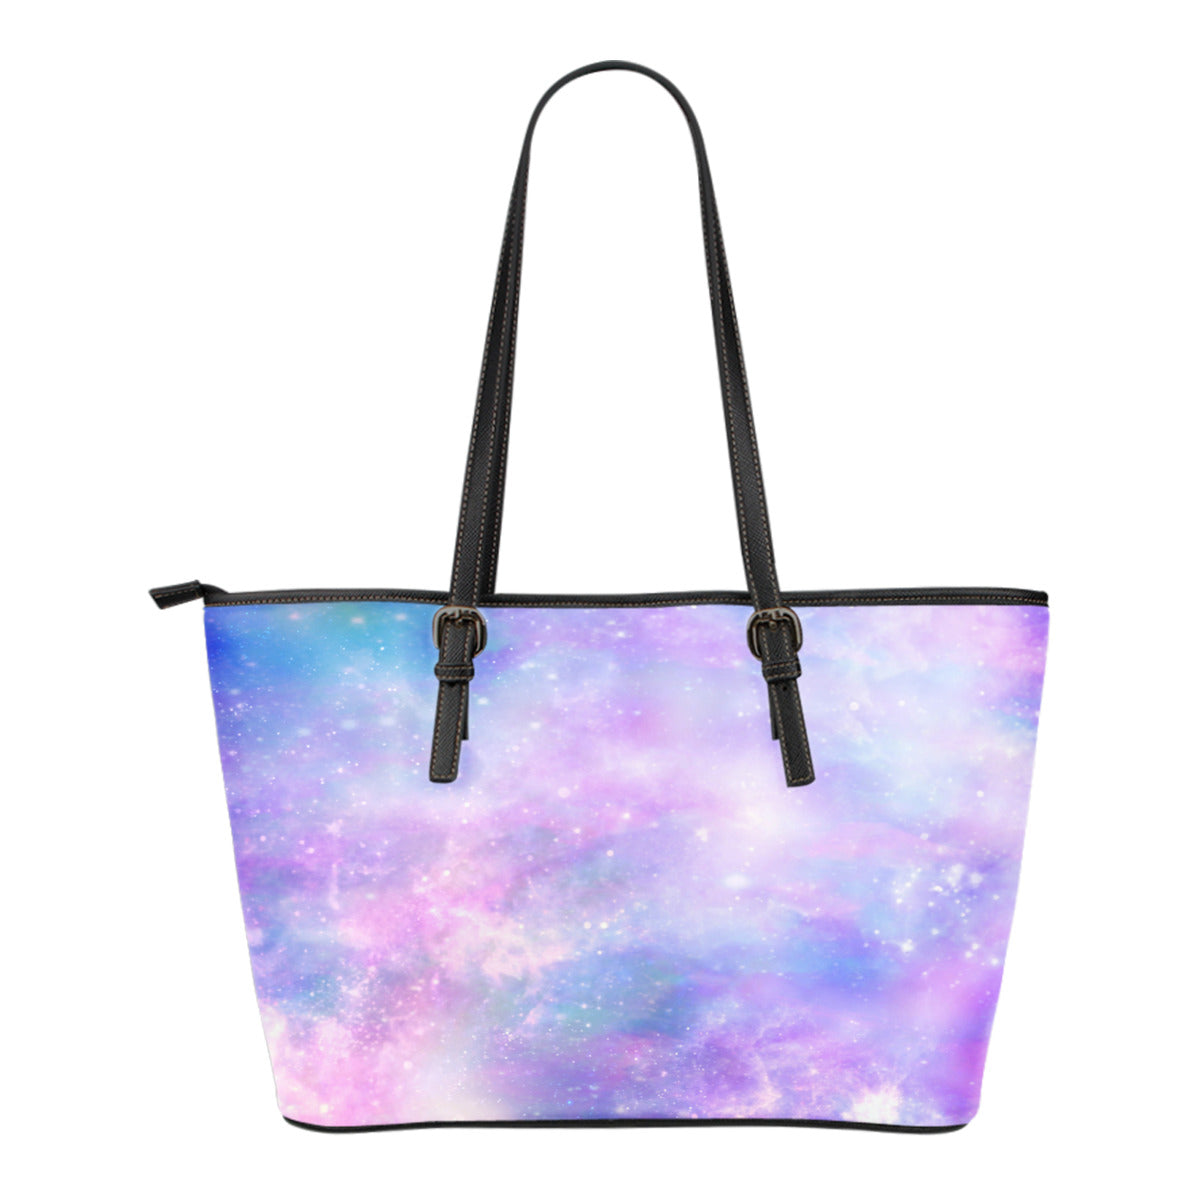 Pastel Galaxy Themed Design C10 Women Small Leather Tote Bag